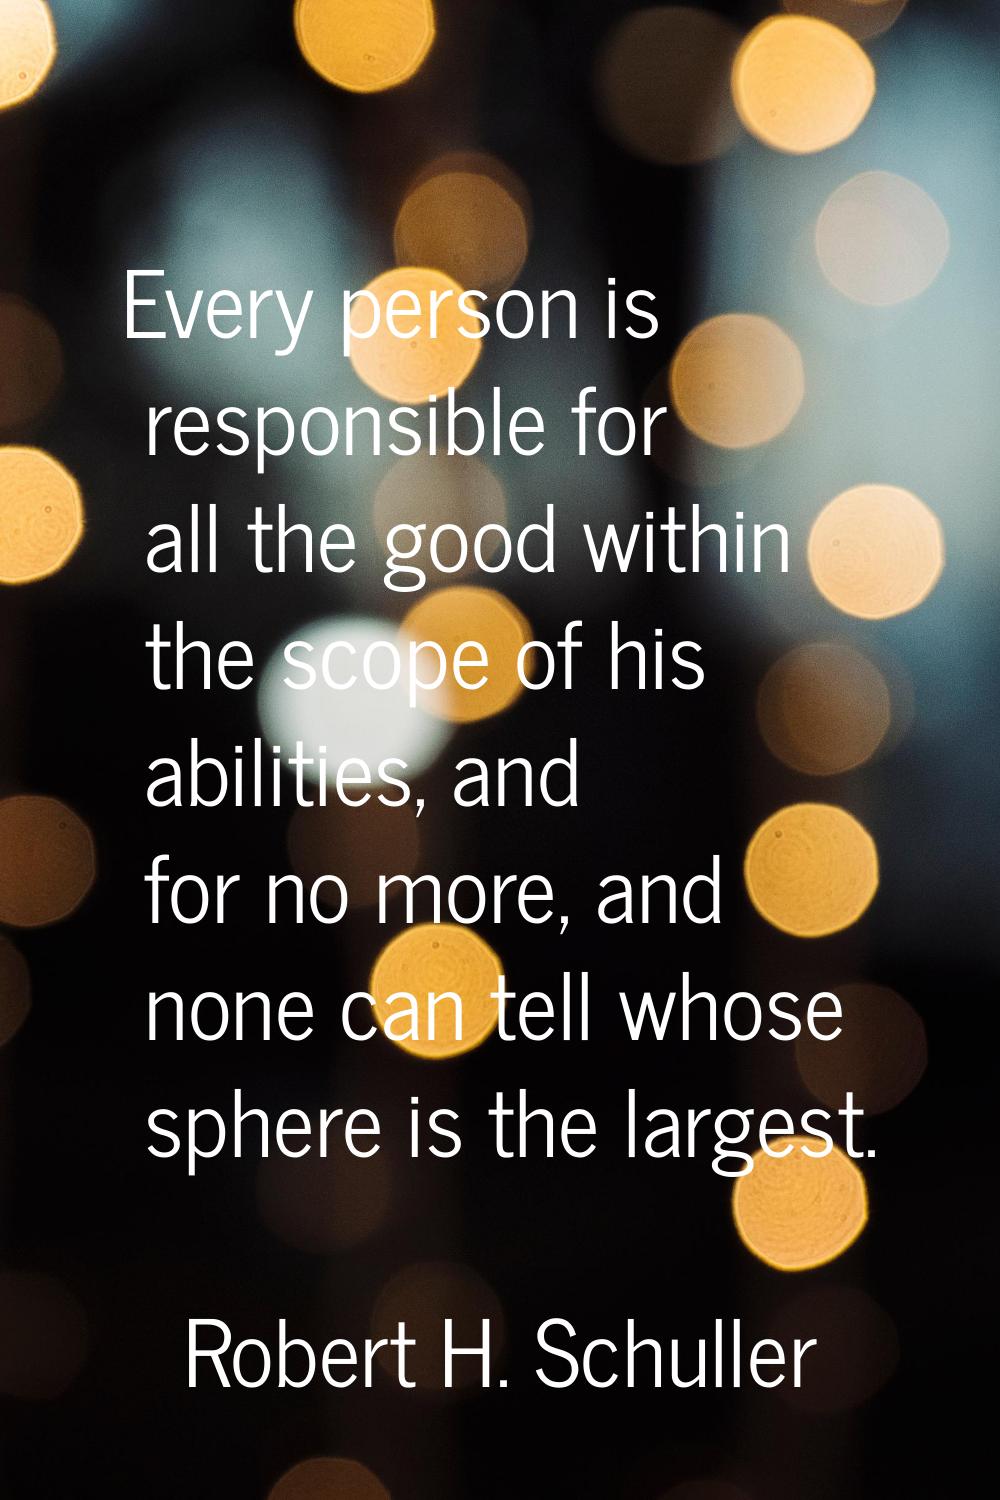 Every person is responsible for all the good within the scope of his abilities, and for no more, an